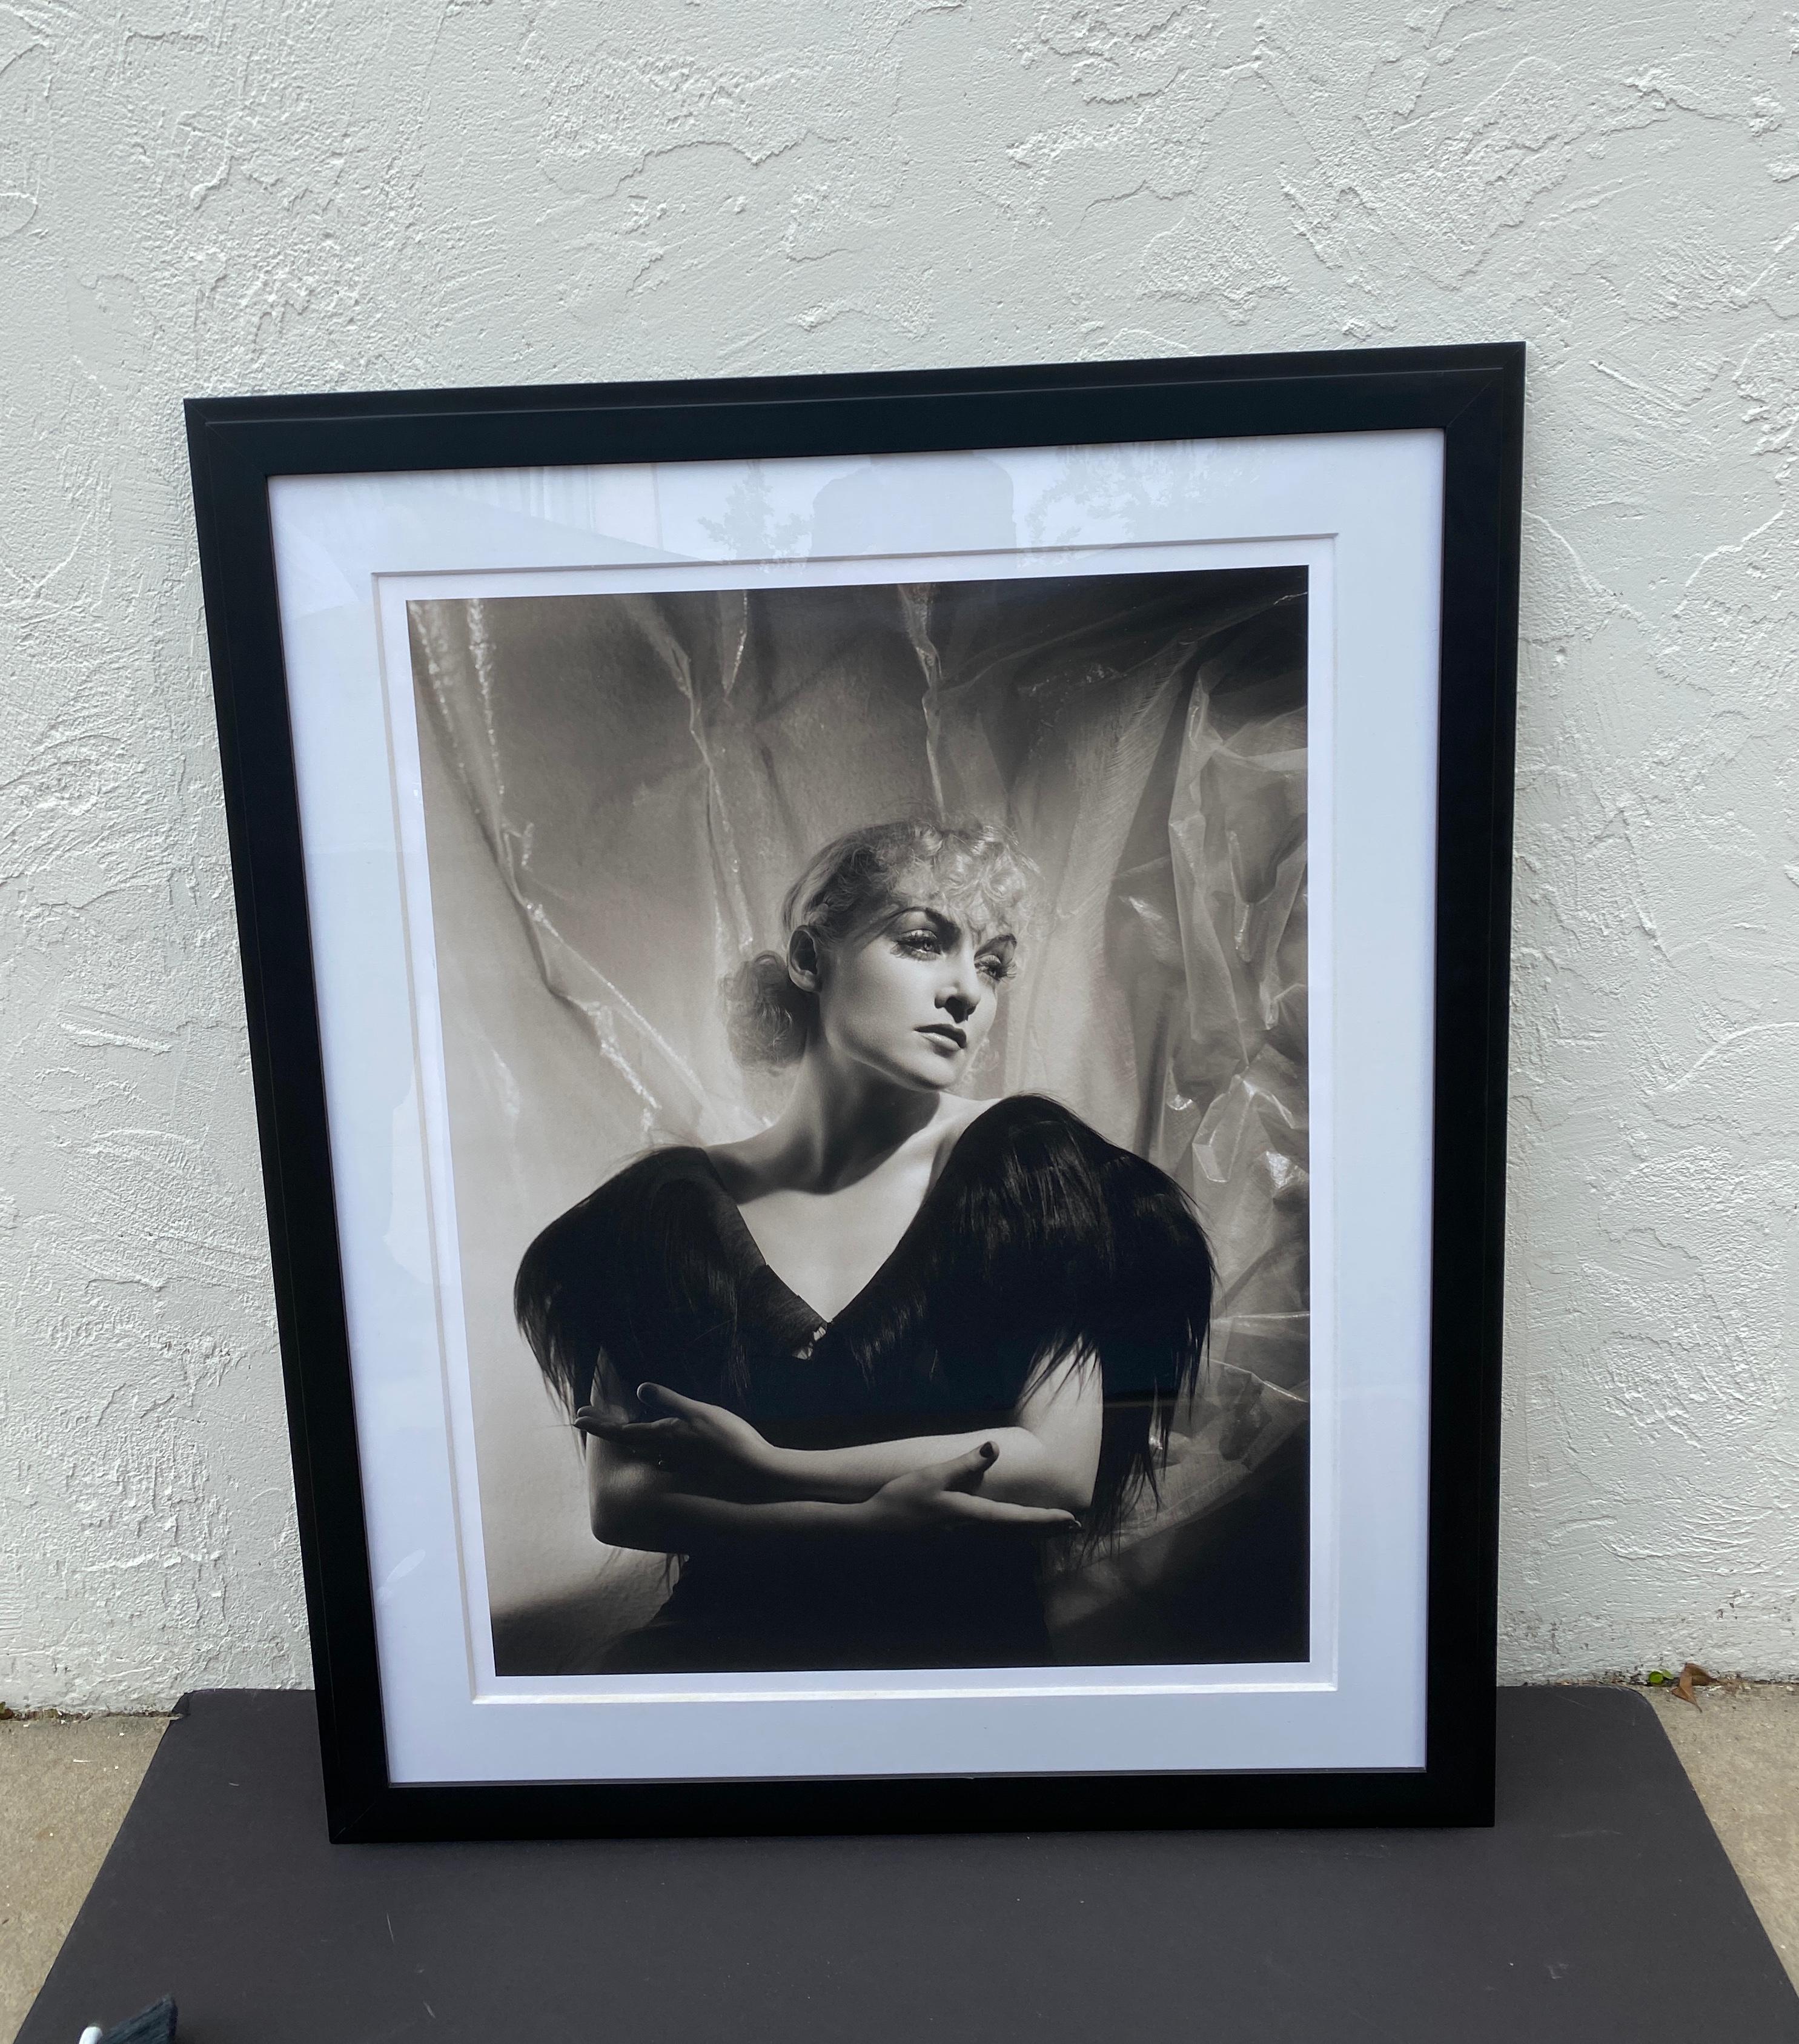 Vintage 2000 George Hurrell Carole Lombard Digital Photograph From 1934 Restored Negative from a Palm Beach estate,

This large scale photograph of the iconic, Hollywood movie star Carole Lombard was originally taken in 1934 by George Hurrell.